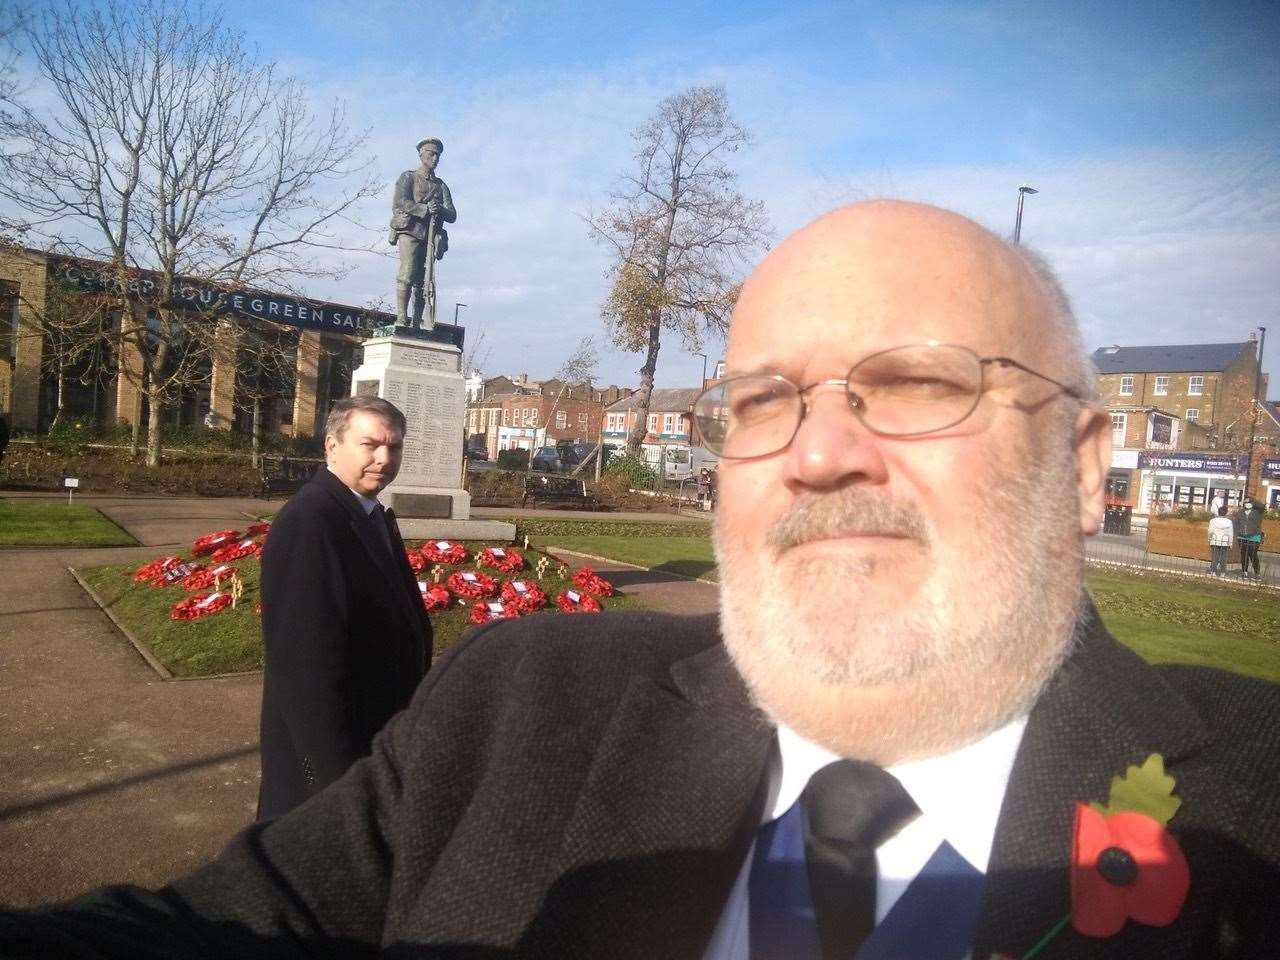 Dartford council leader Cllr Jeremy Kite at the war memorial with Dartford MP Gareth Johnson in the background. Picture: Jeremy Kite (43050519)